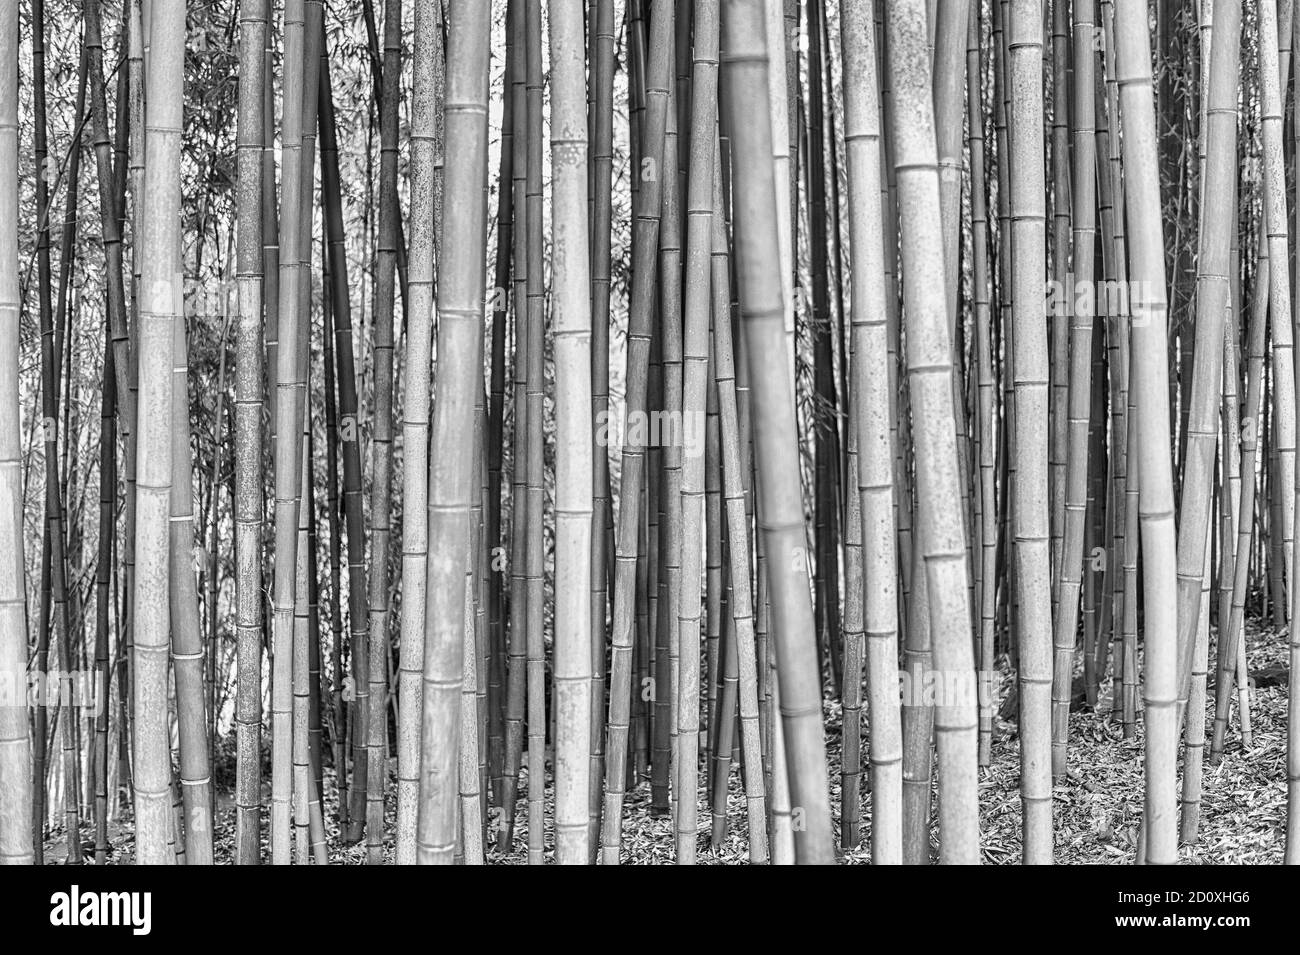 Background with foliage pattern of bamboo trees in a grove or forest Stock Photo